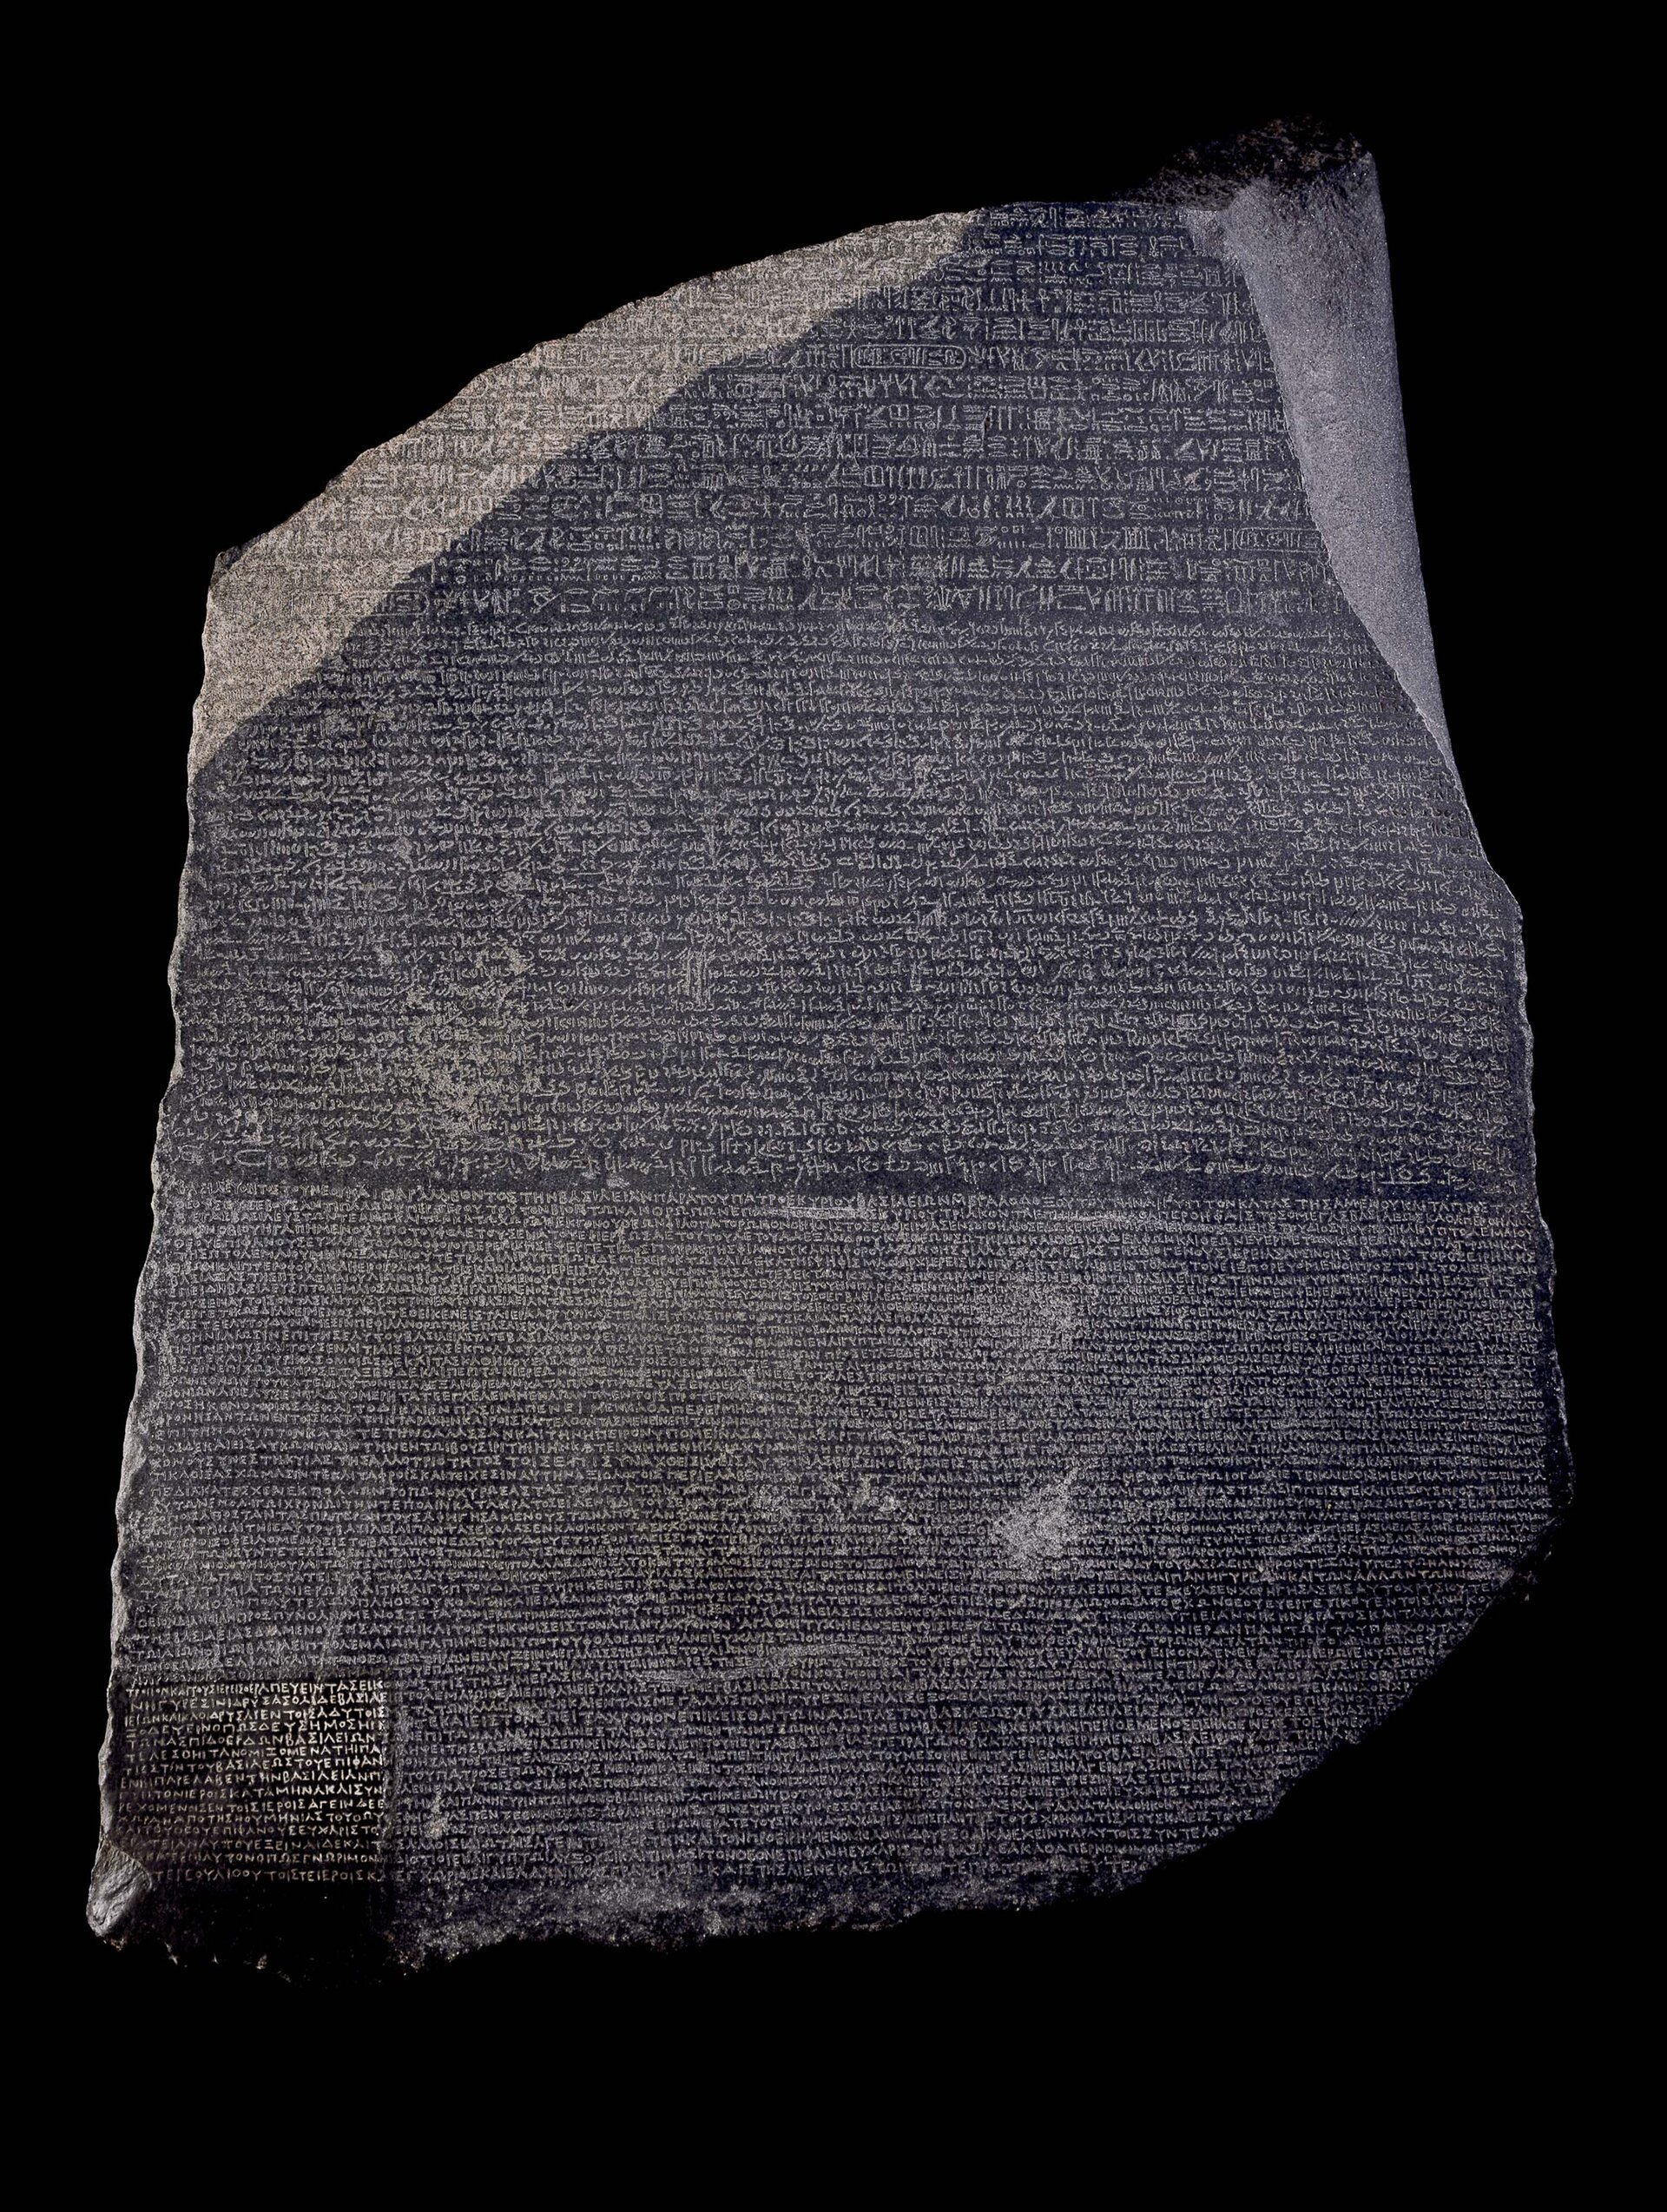 The Rosetta Stone, discovered in 1799